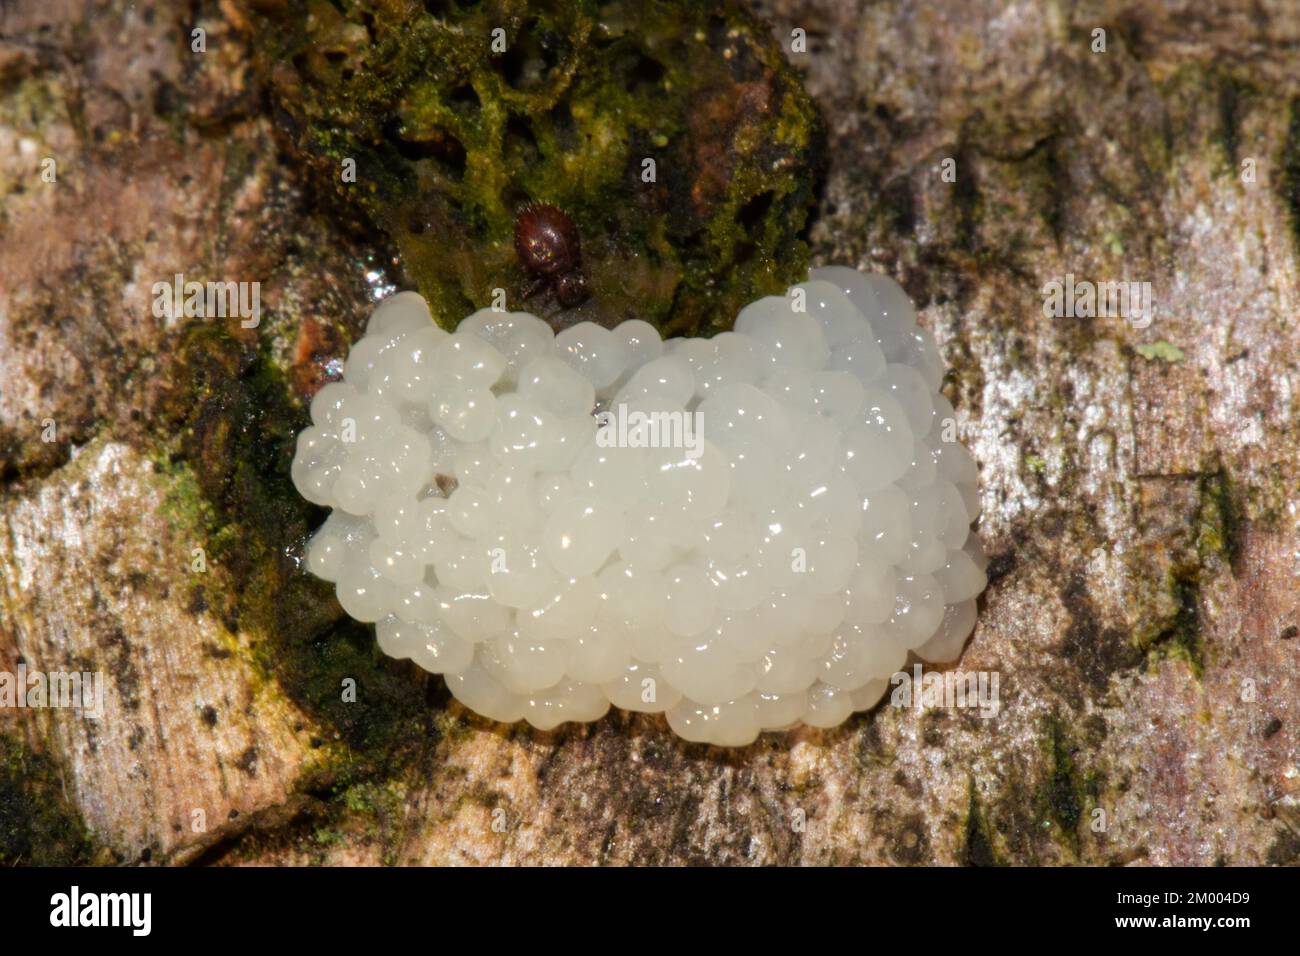 Fish egg slime fungus white spherical fruiting bodies on tree trunk Stock Photo